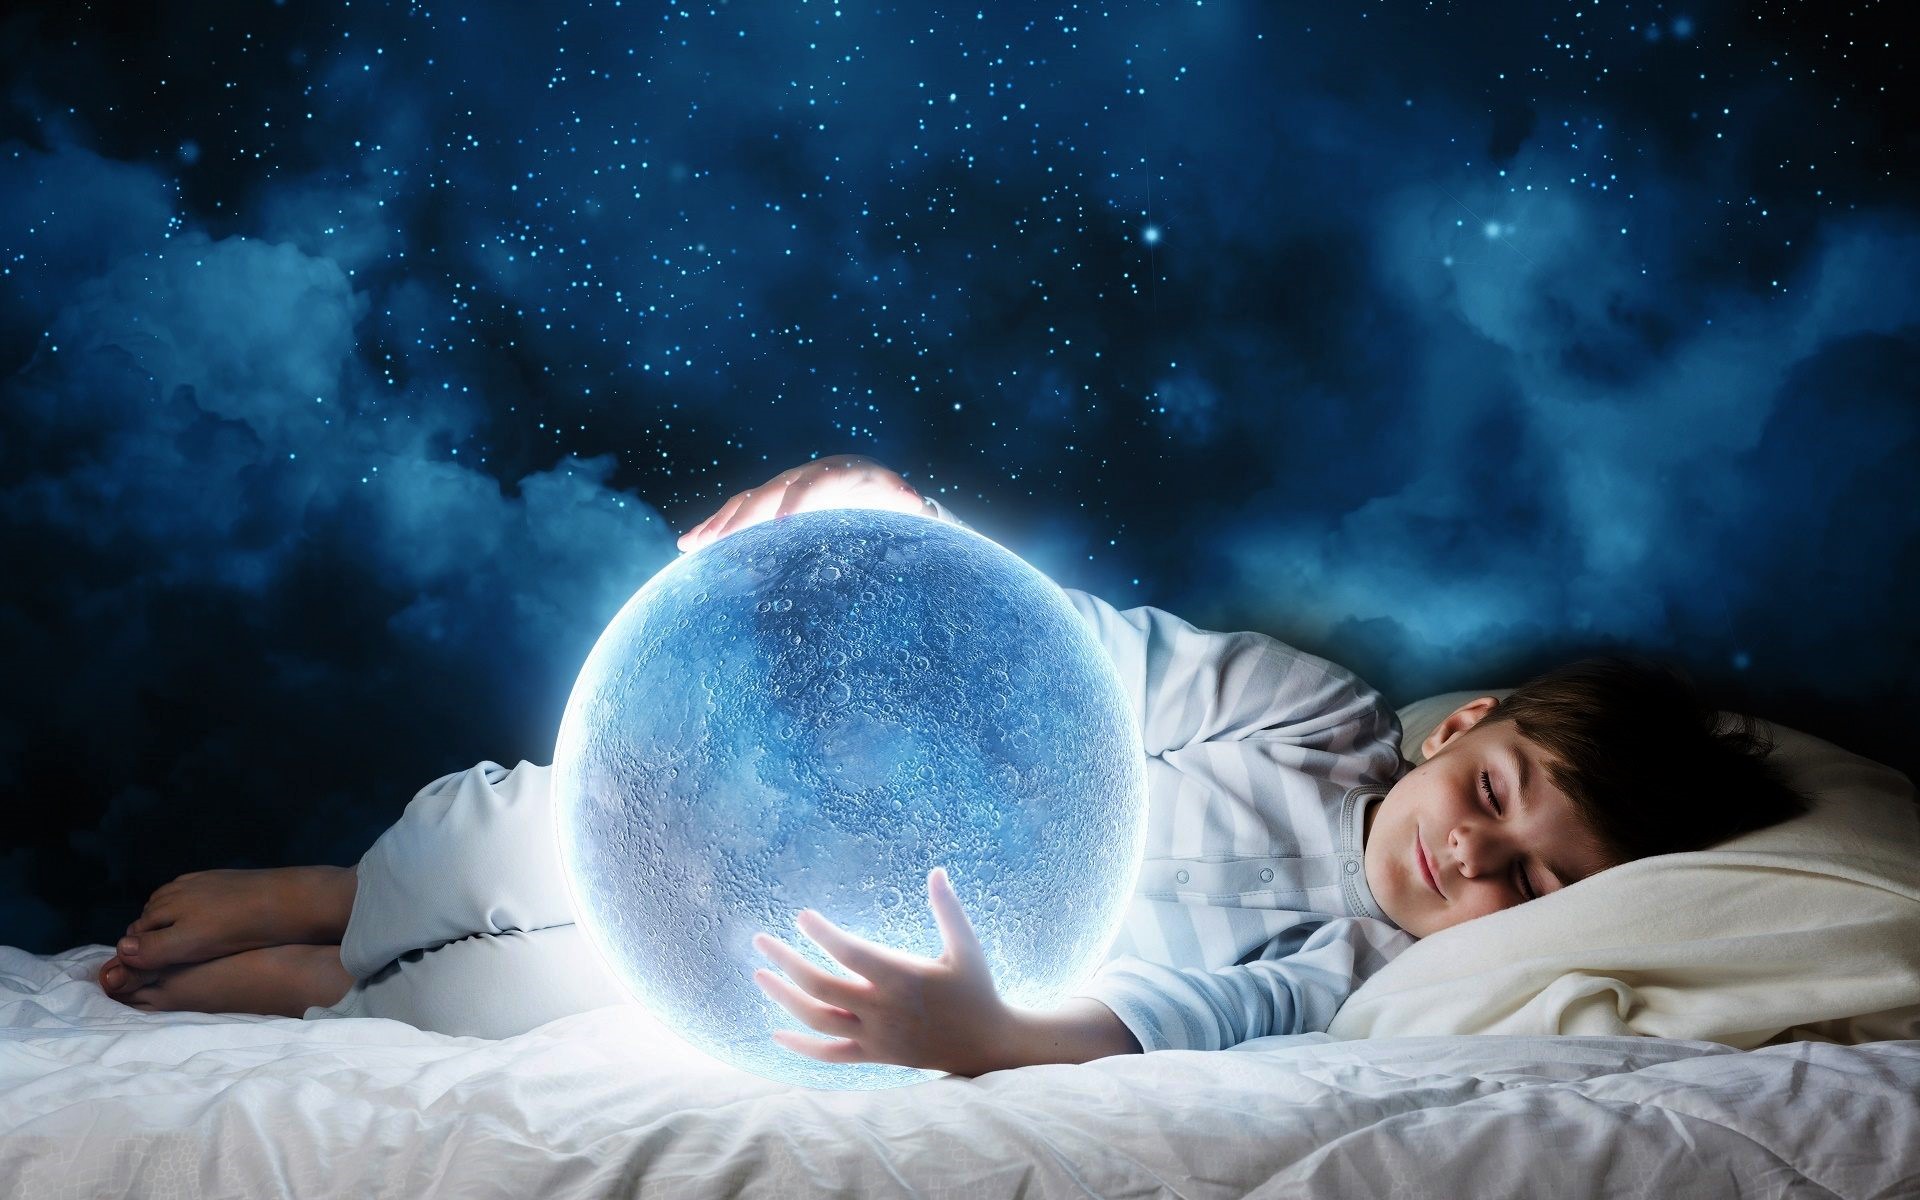 THE MOST COMMON DREAMS AND WHAT THEY MEAN